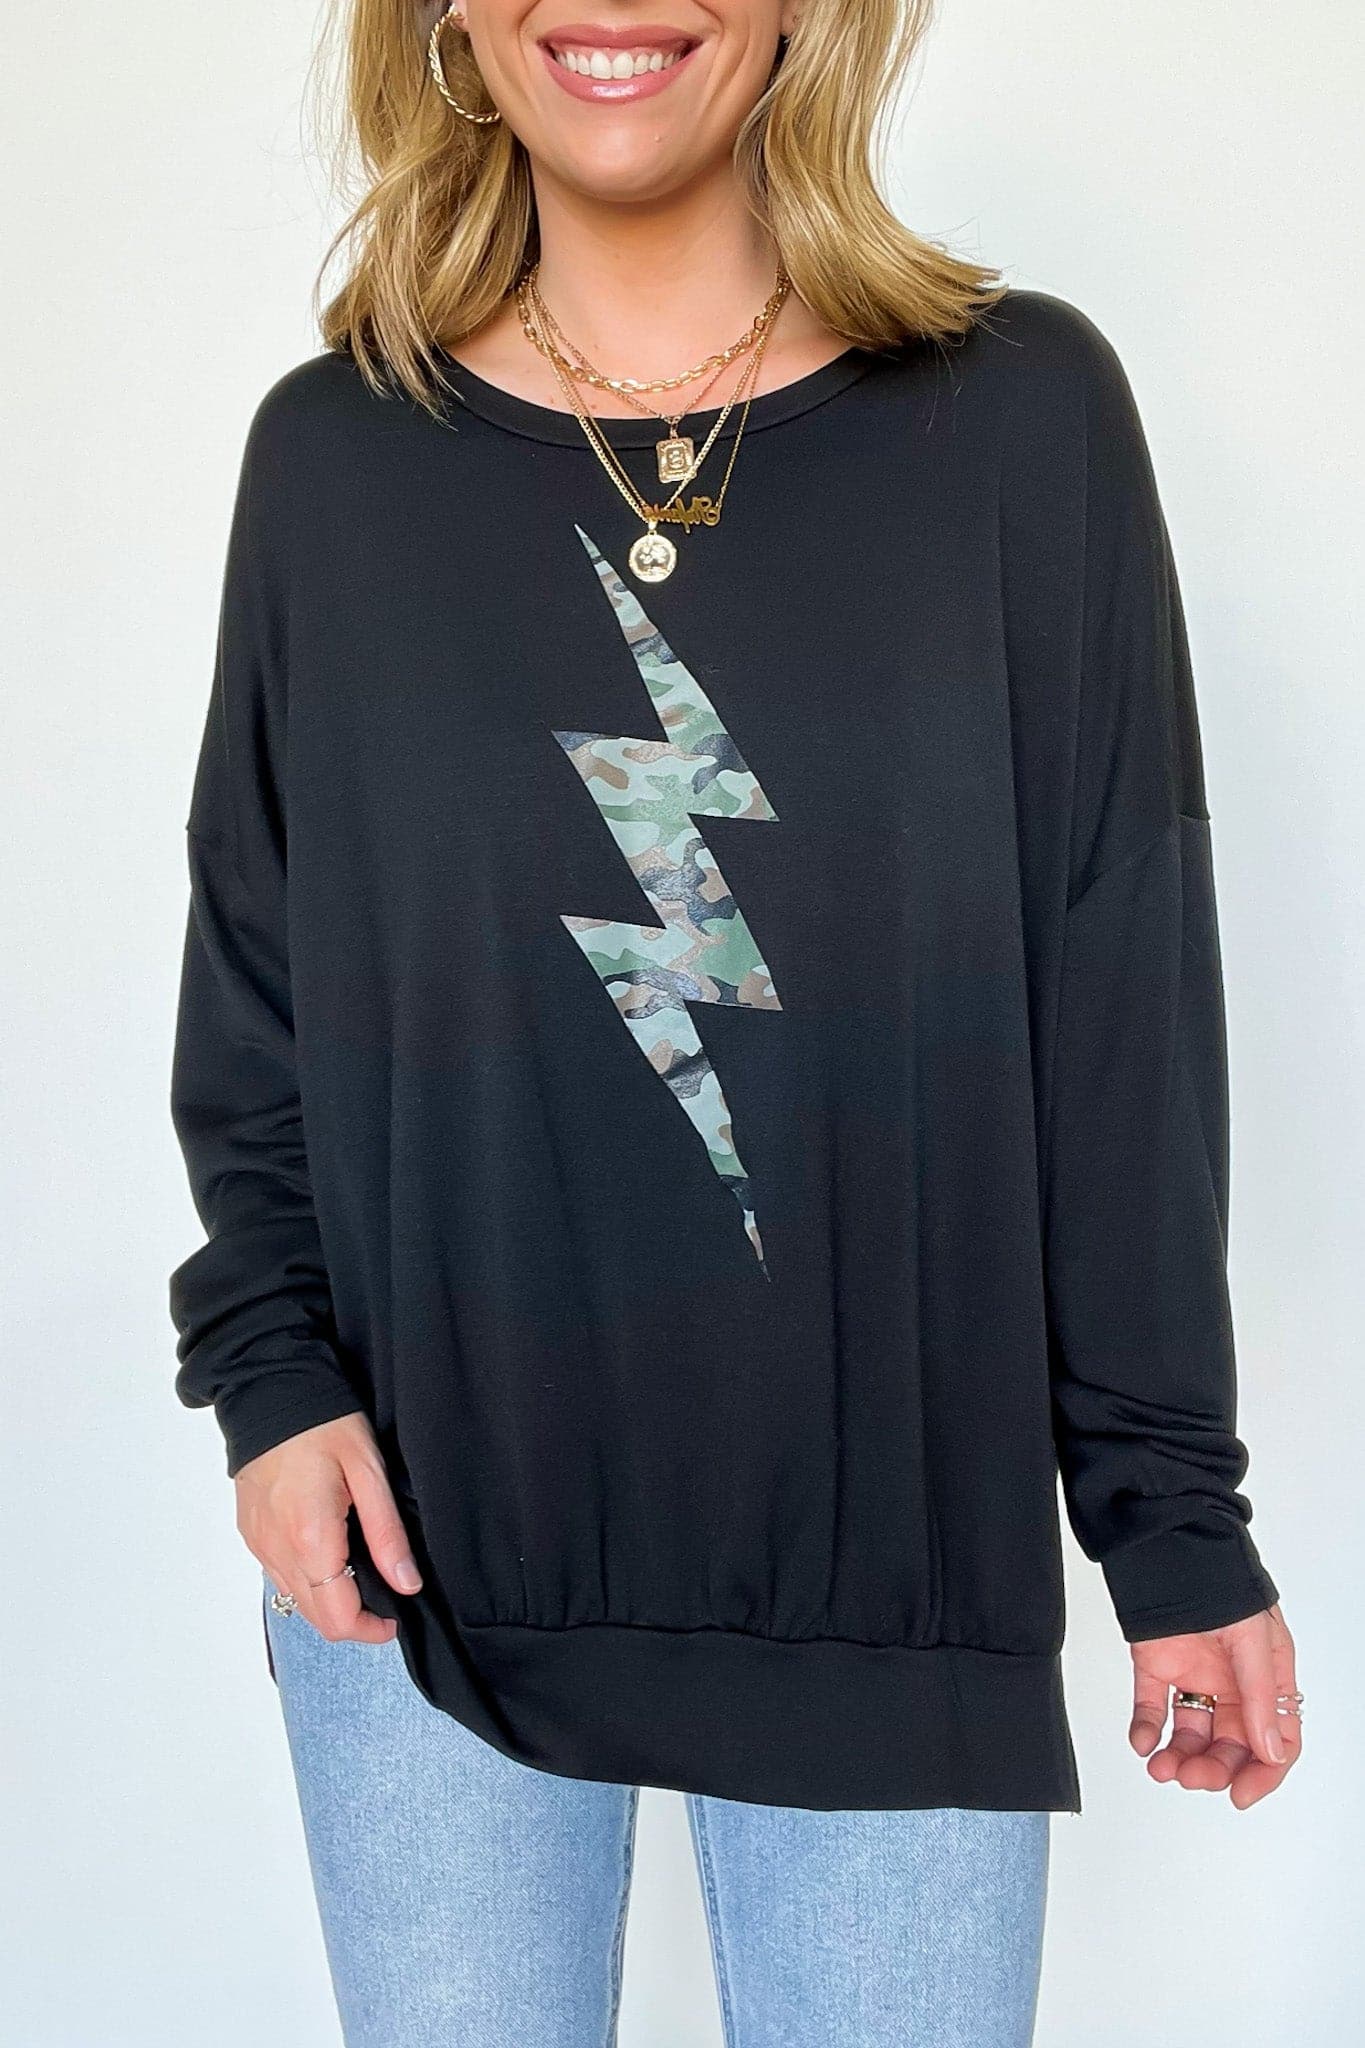  Hidden Lightning Graphic Pullover - FINAL SALE - Madison and Mallory